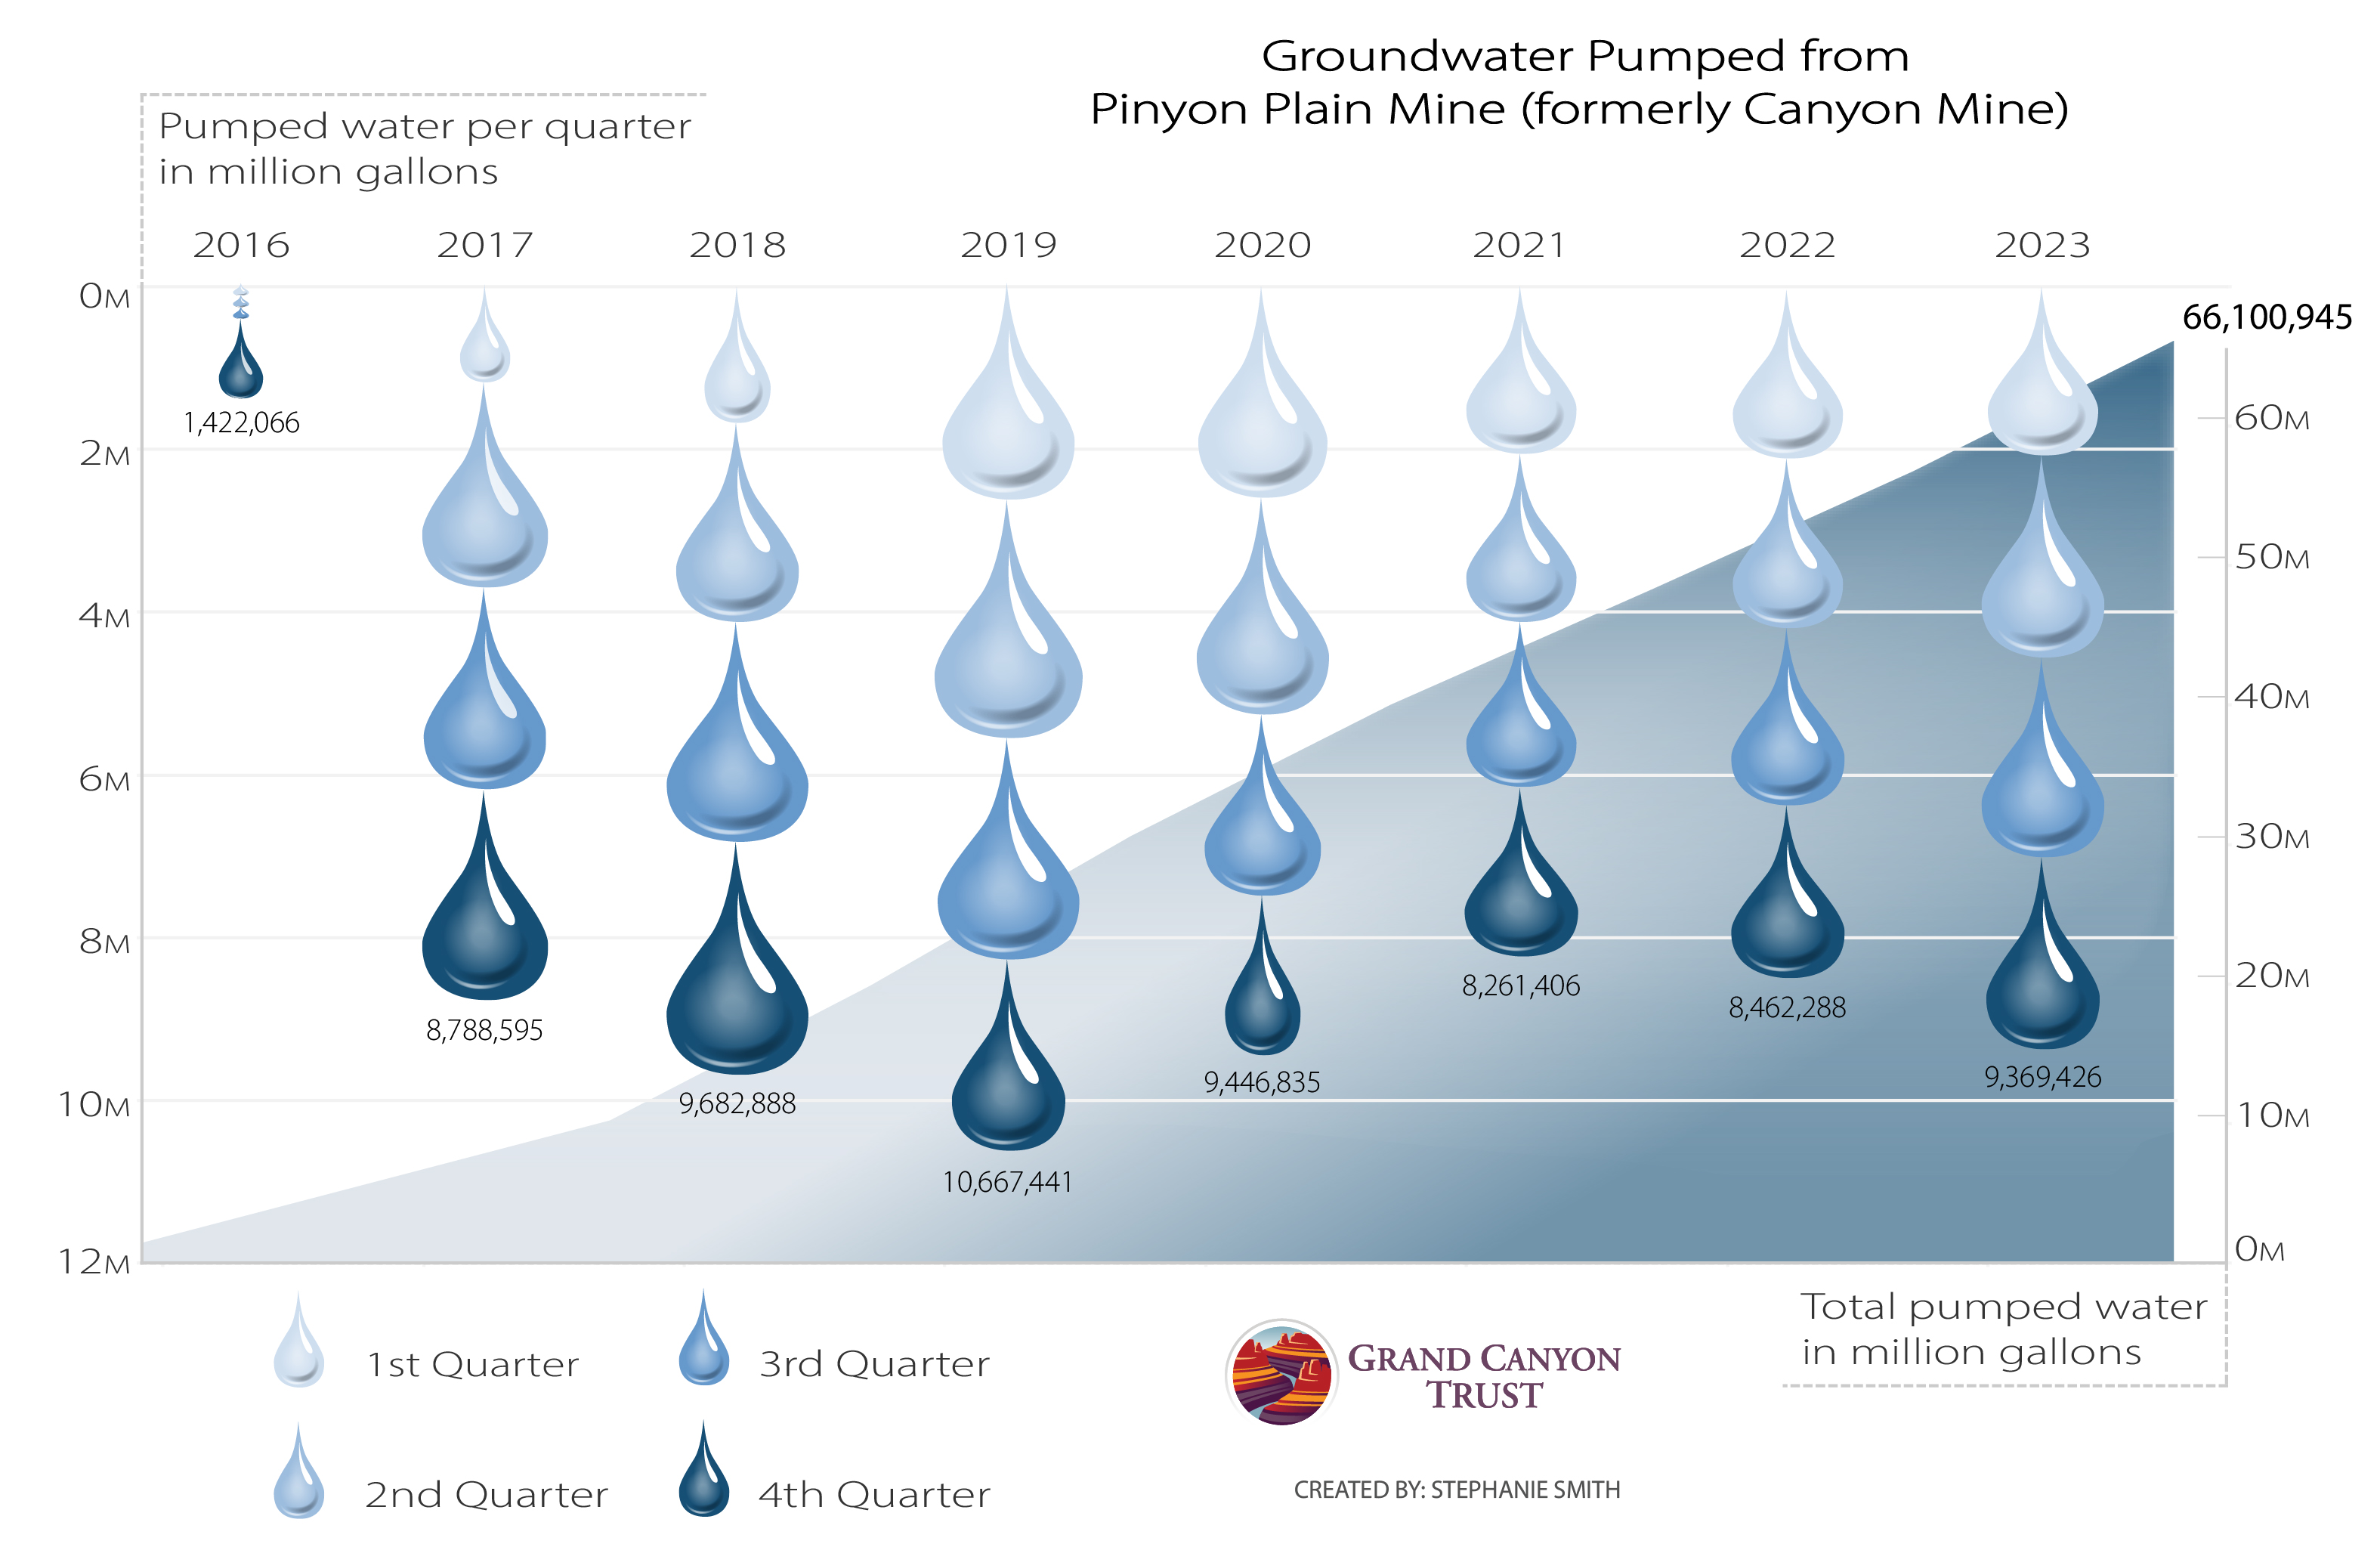 How much water has been pumped out of Canyon Mine (aka Pinyon Plain Mine?)